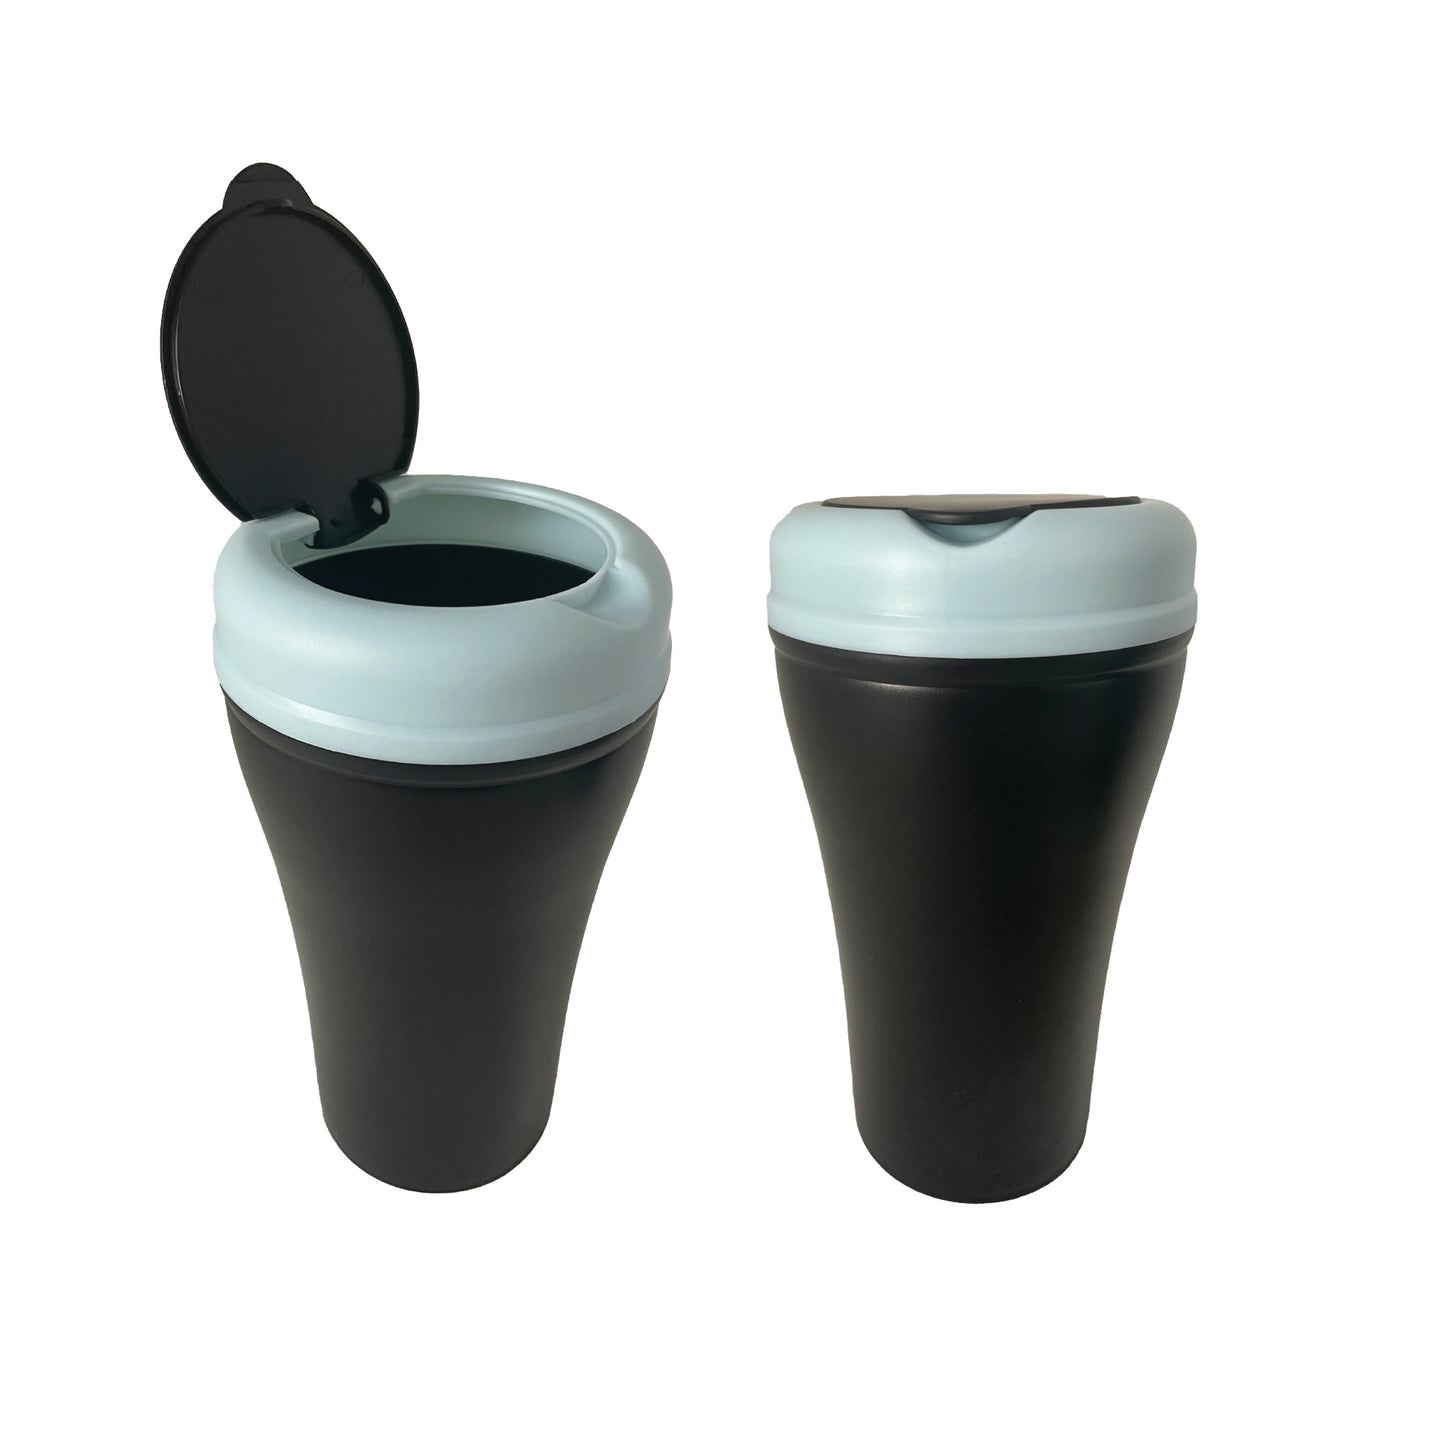 Mini Car Trash Can with Lid, Automotive Cup Holder Mini Vehicle Garbage Can Trash Bin for Car. Fit in Side Door Cup Holder for Receipts